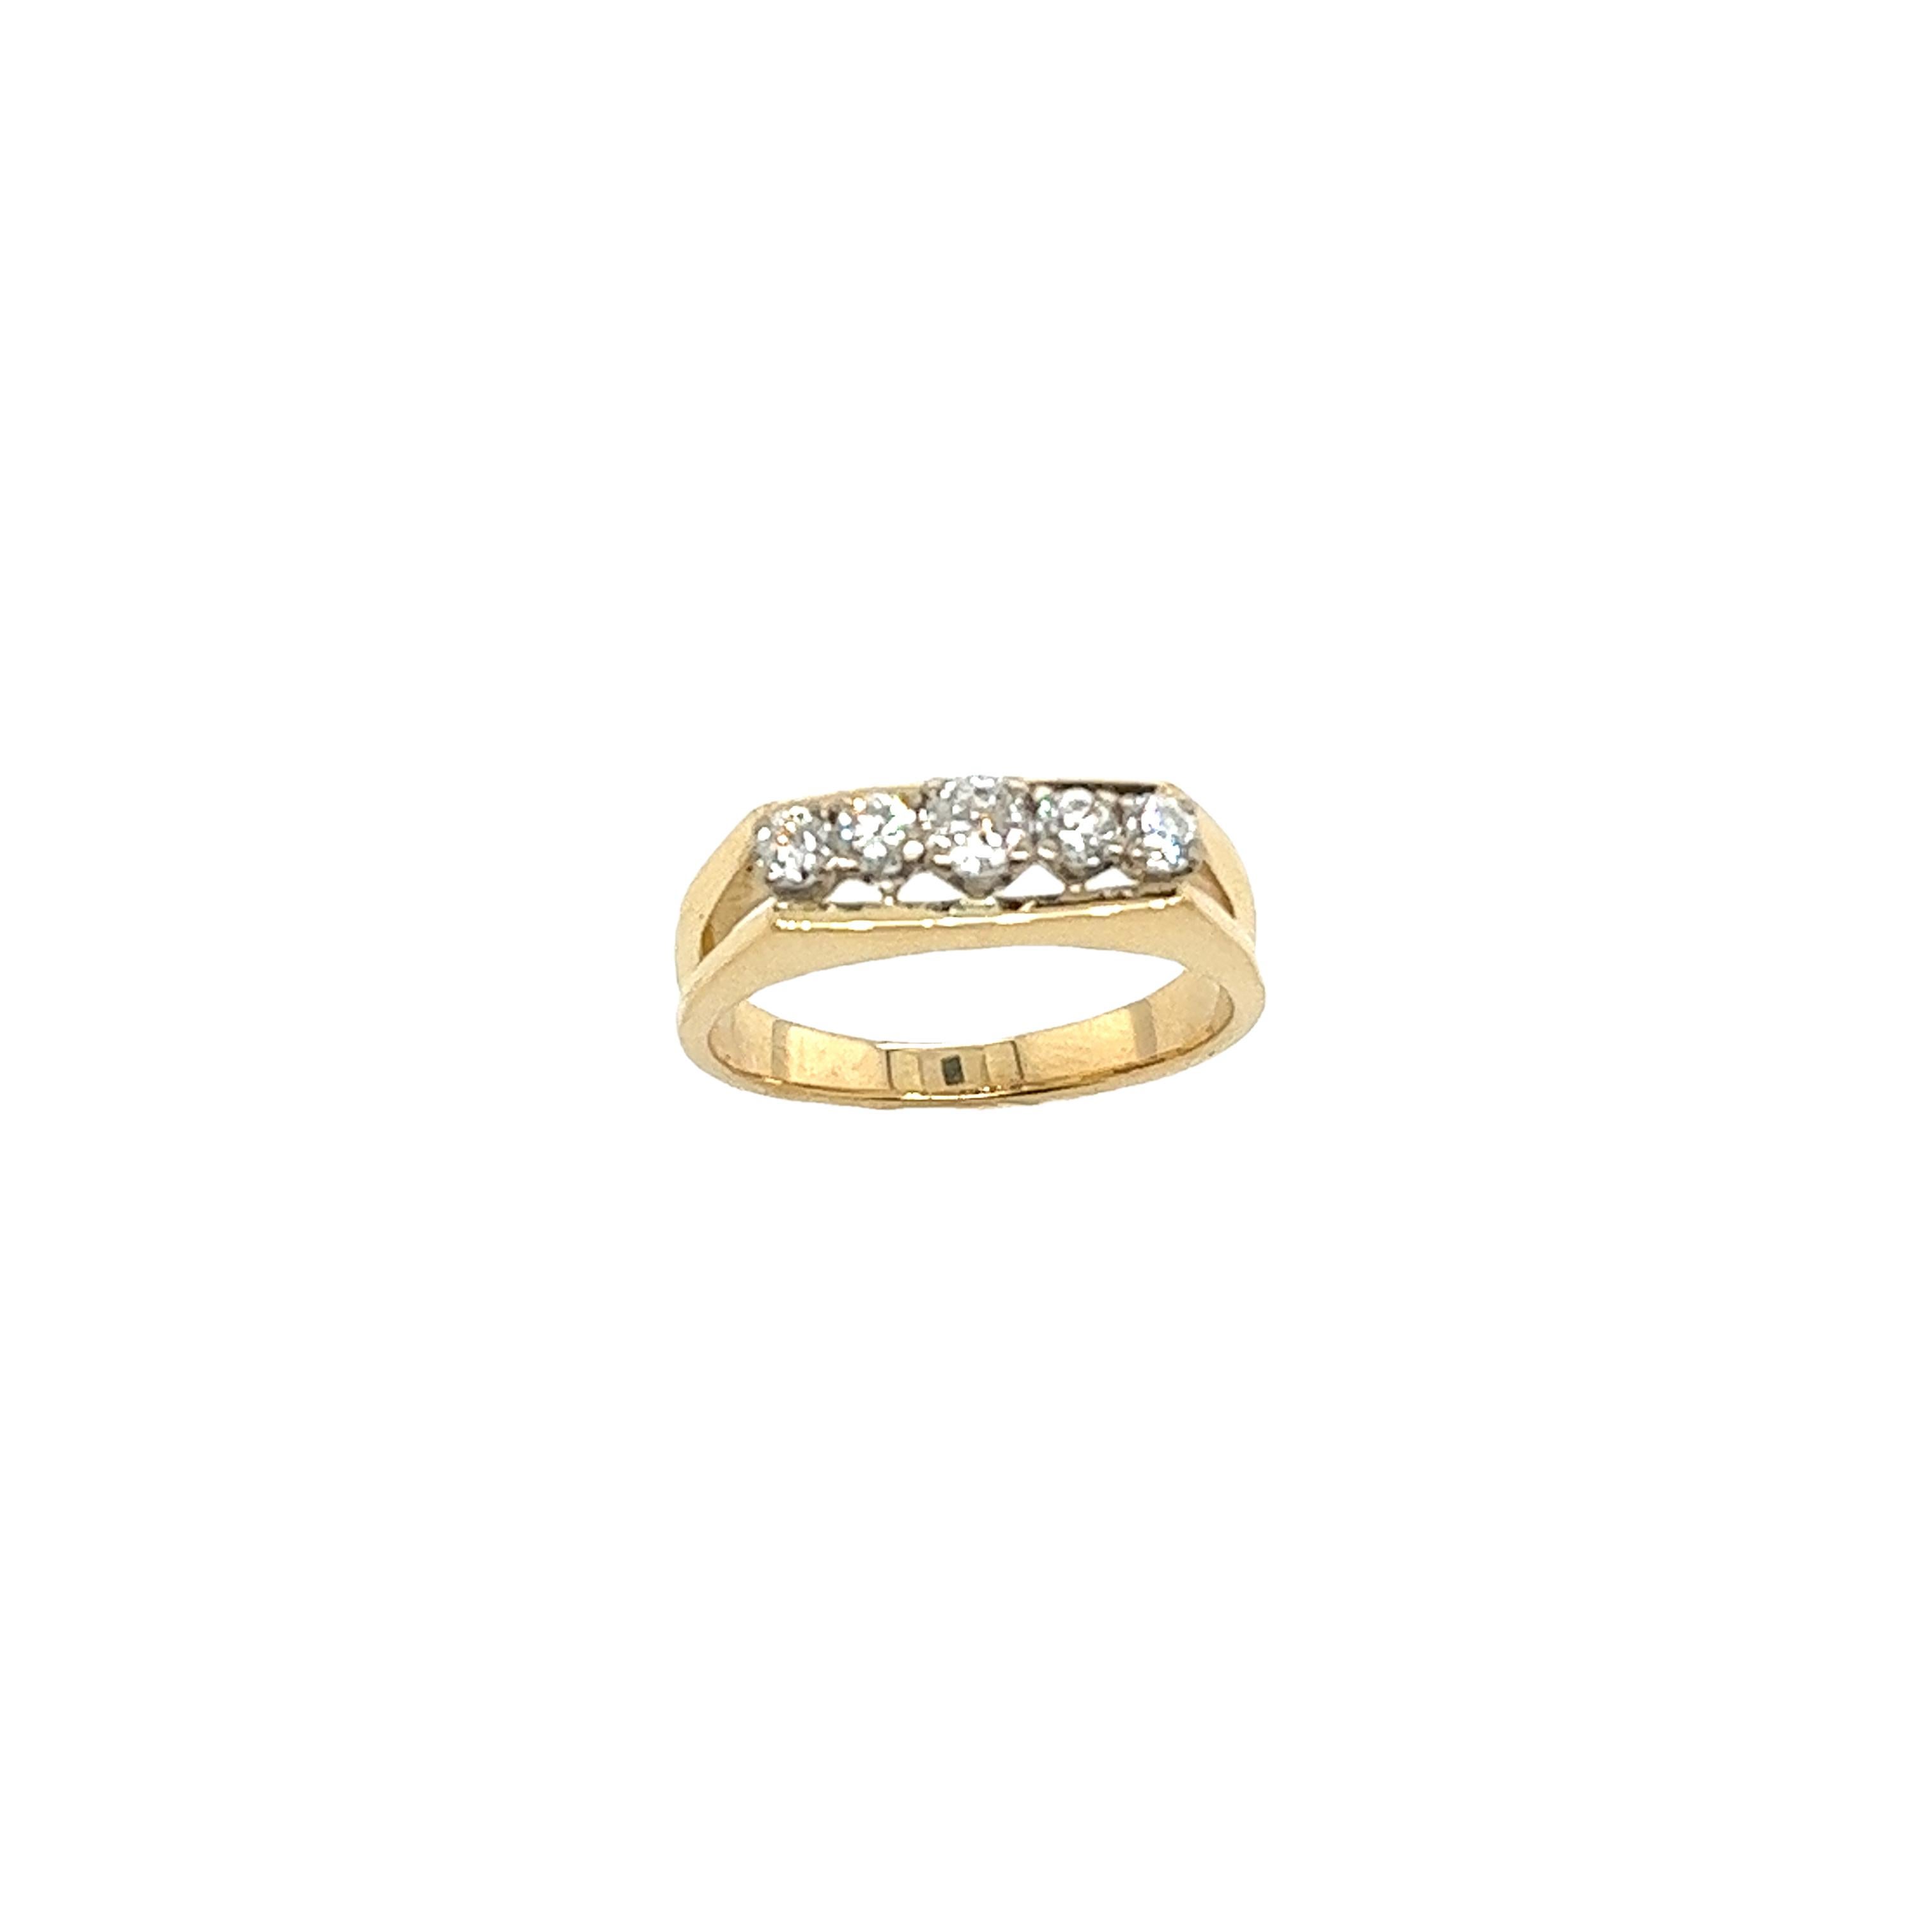 18ct Yellow Gold Diamond 5 Stone Ring, 0.35ct G/VS In Good Condition For Sale In London, GB